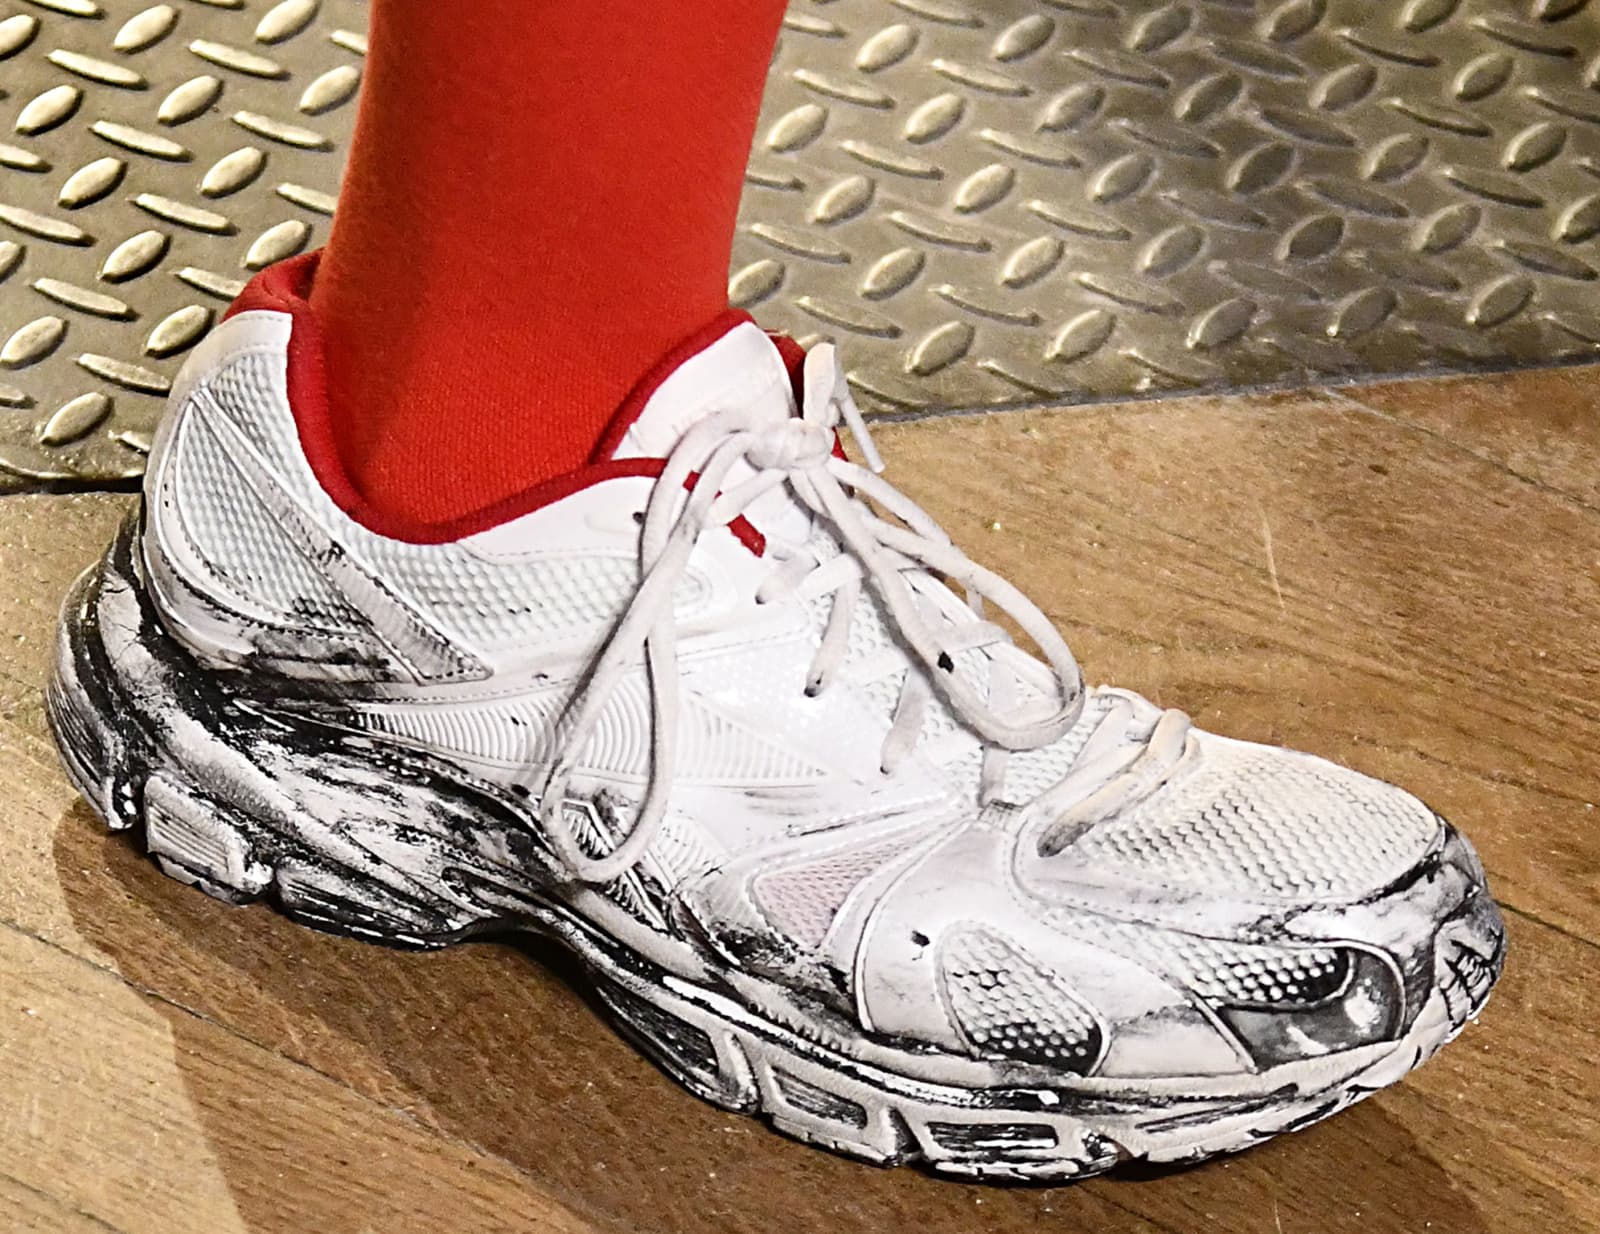 Vetements is Dropping Dirty with Reebok of Heat°